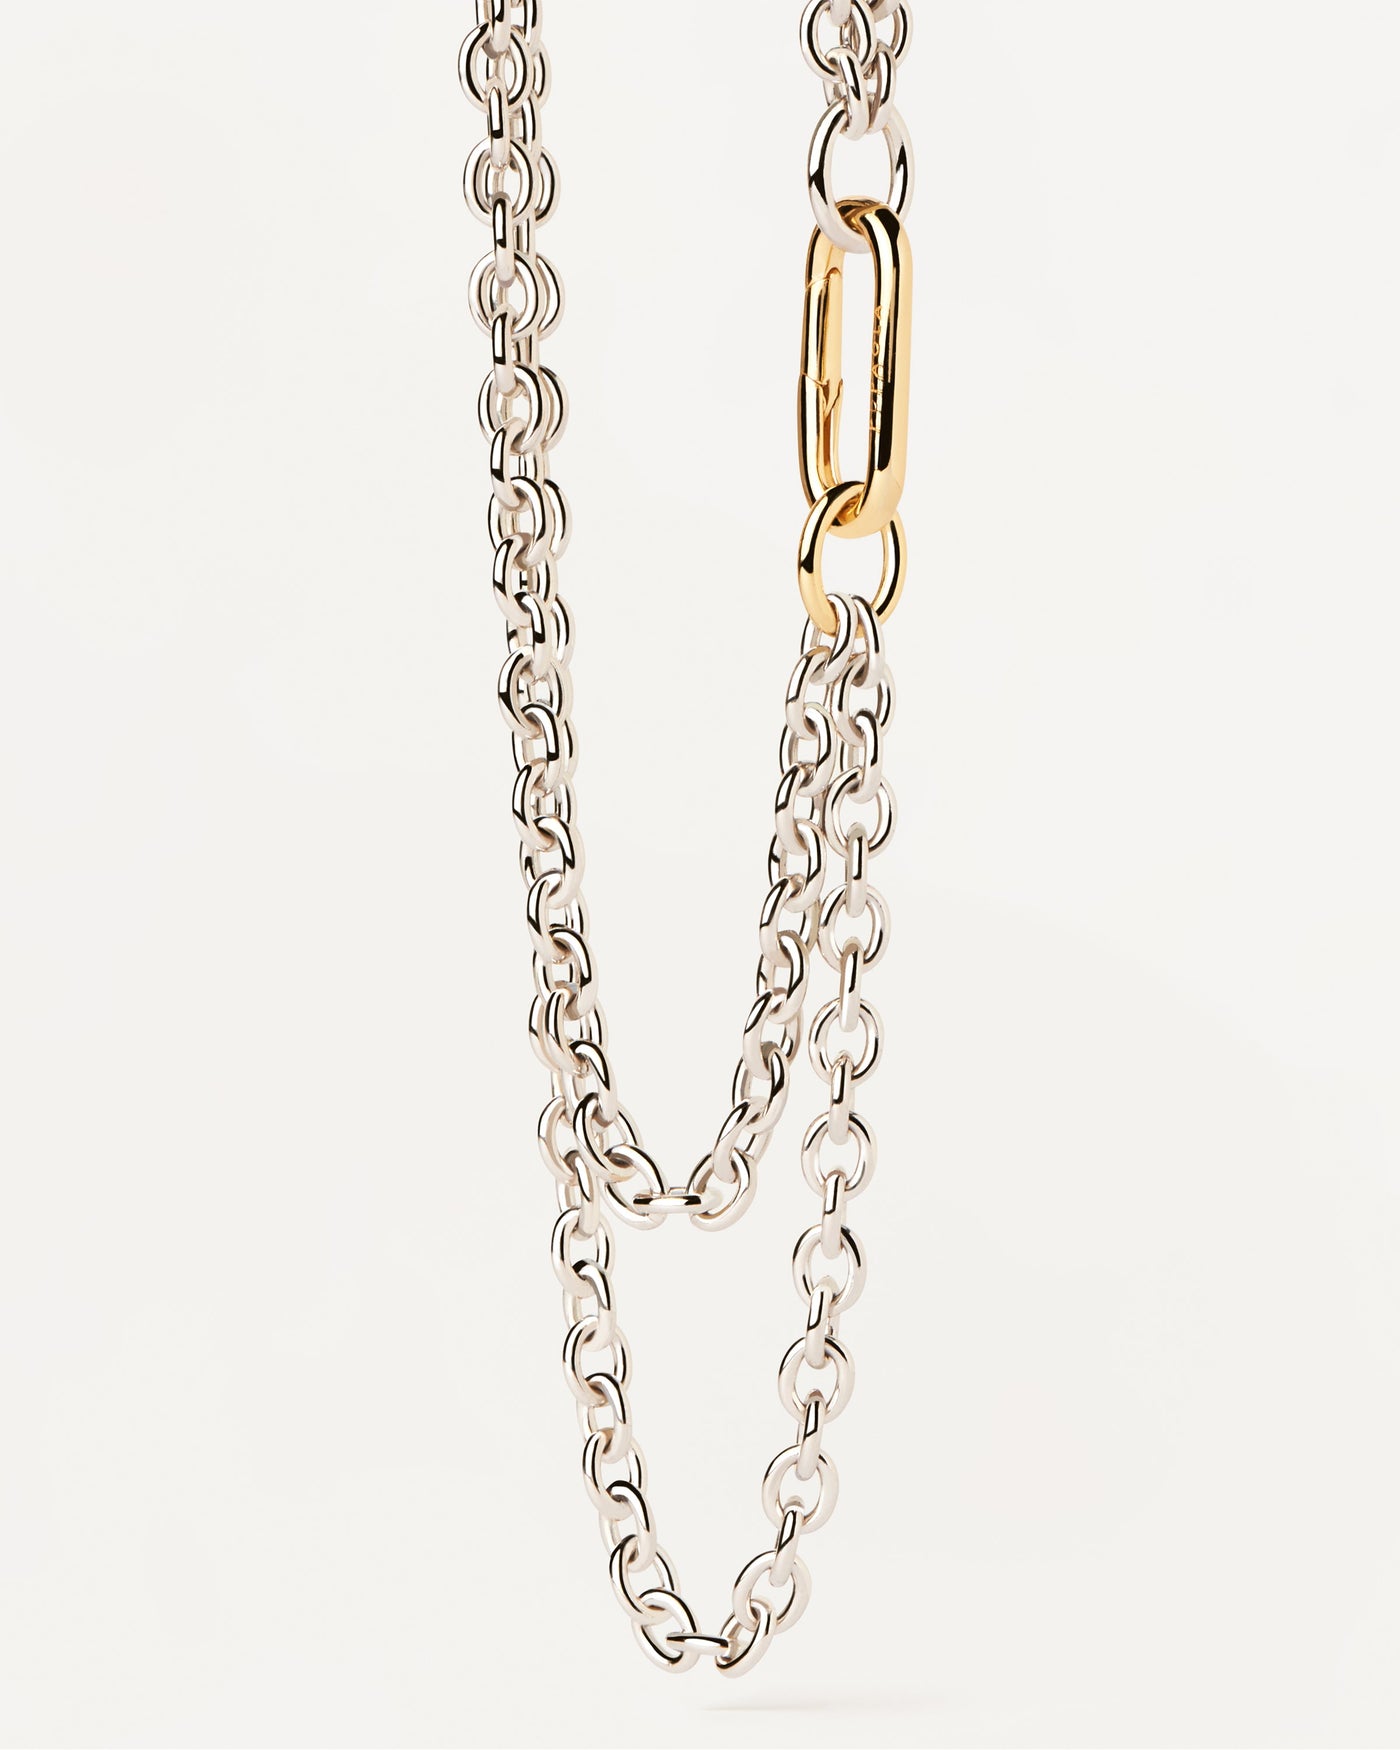 2023 Selection | Double Beat Chain Necklace. Bicolor double chain necklace with silver links and bold gold-plated clasp. Get the latest arrival from PDPAOLA. Place your order safely and get this Best Seller. Free Shipping.